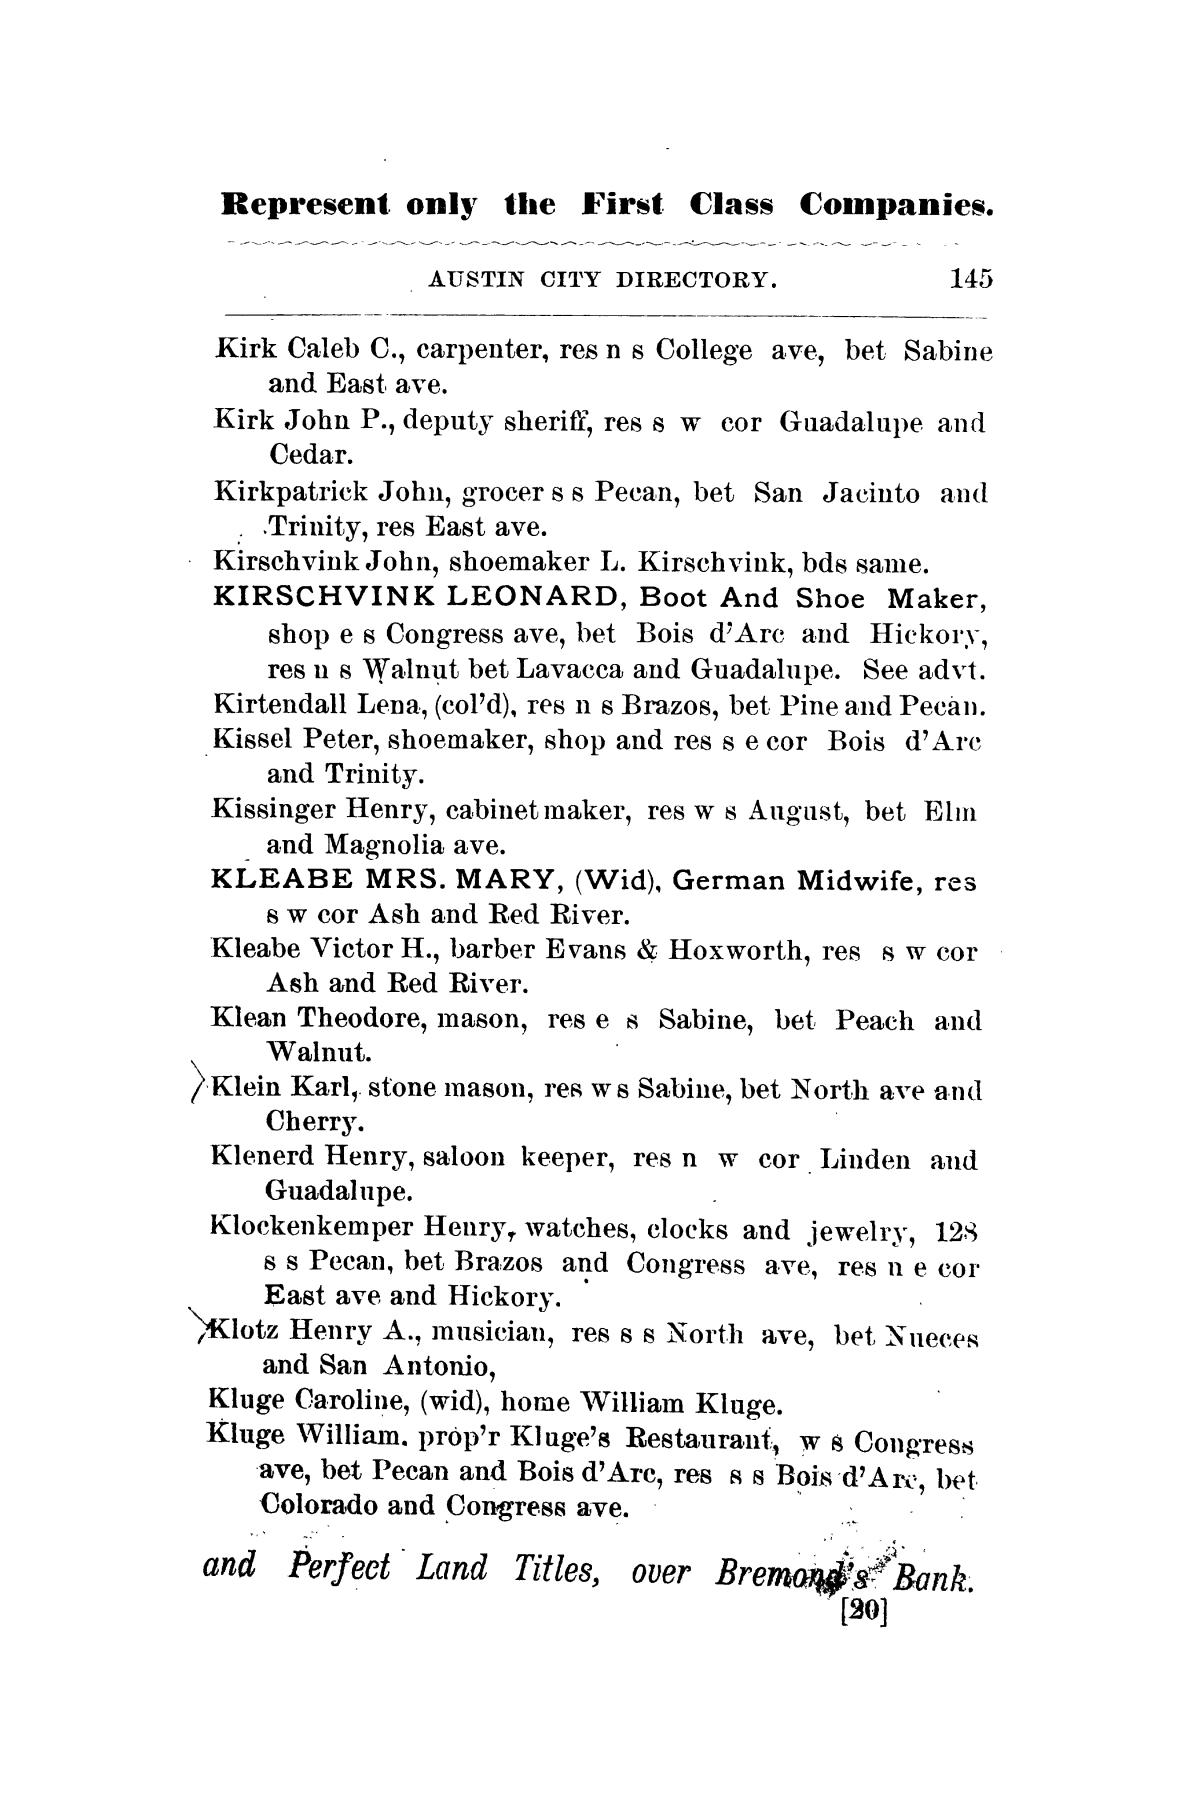 Mooney & Morrison's General Directory Of The City Of Austin, Texas, For 1877-78.
                                                
                                                    145
                                                